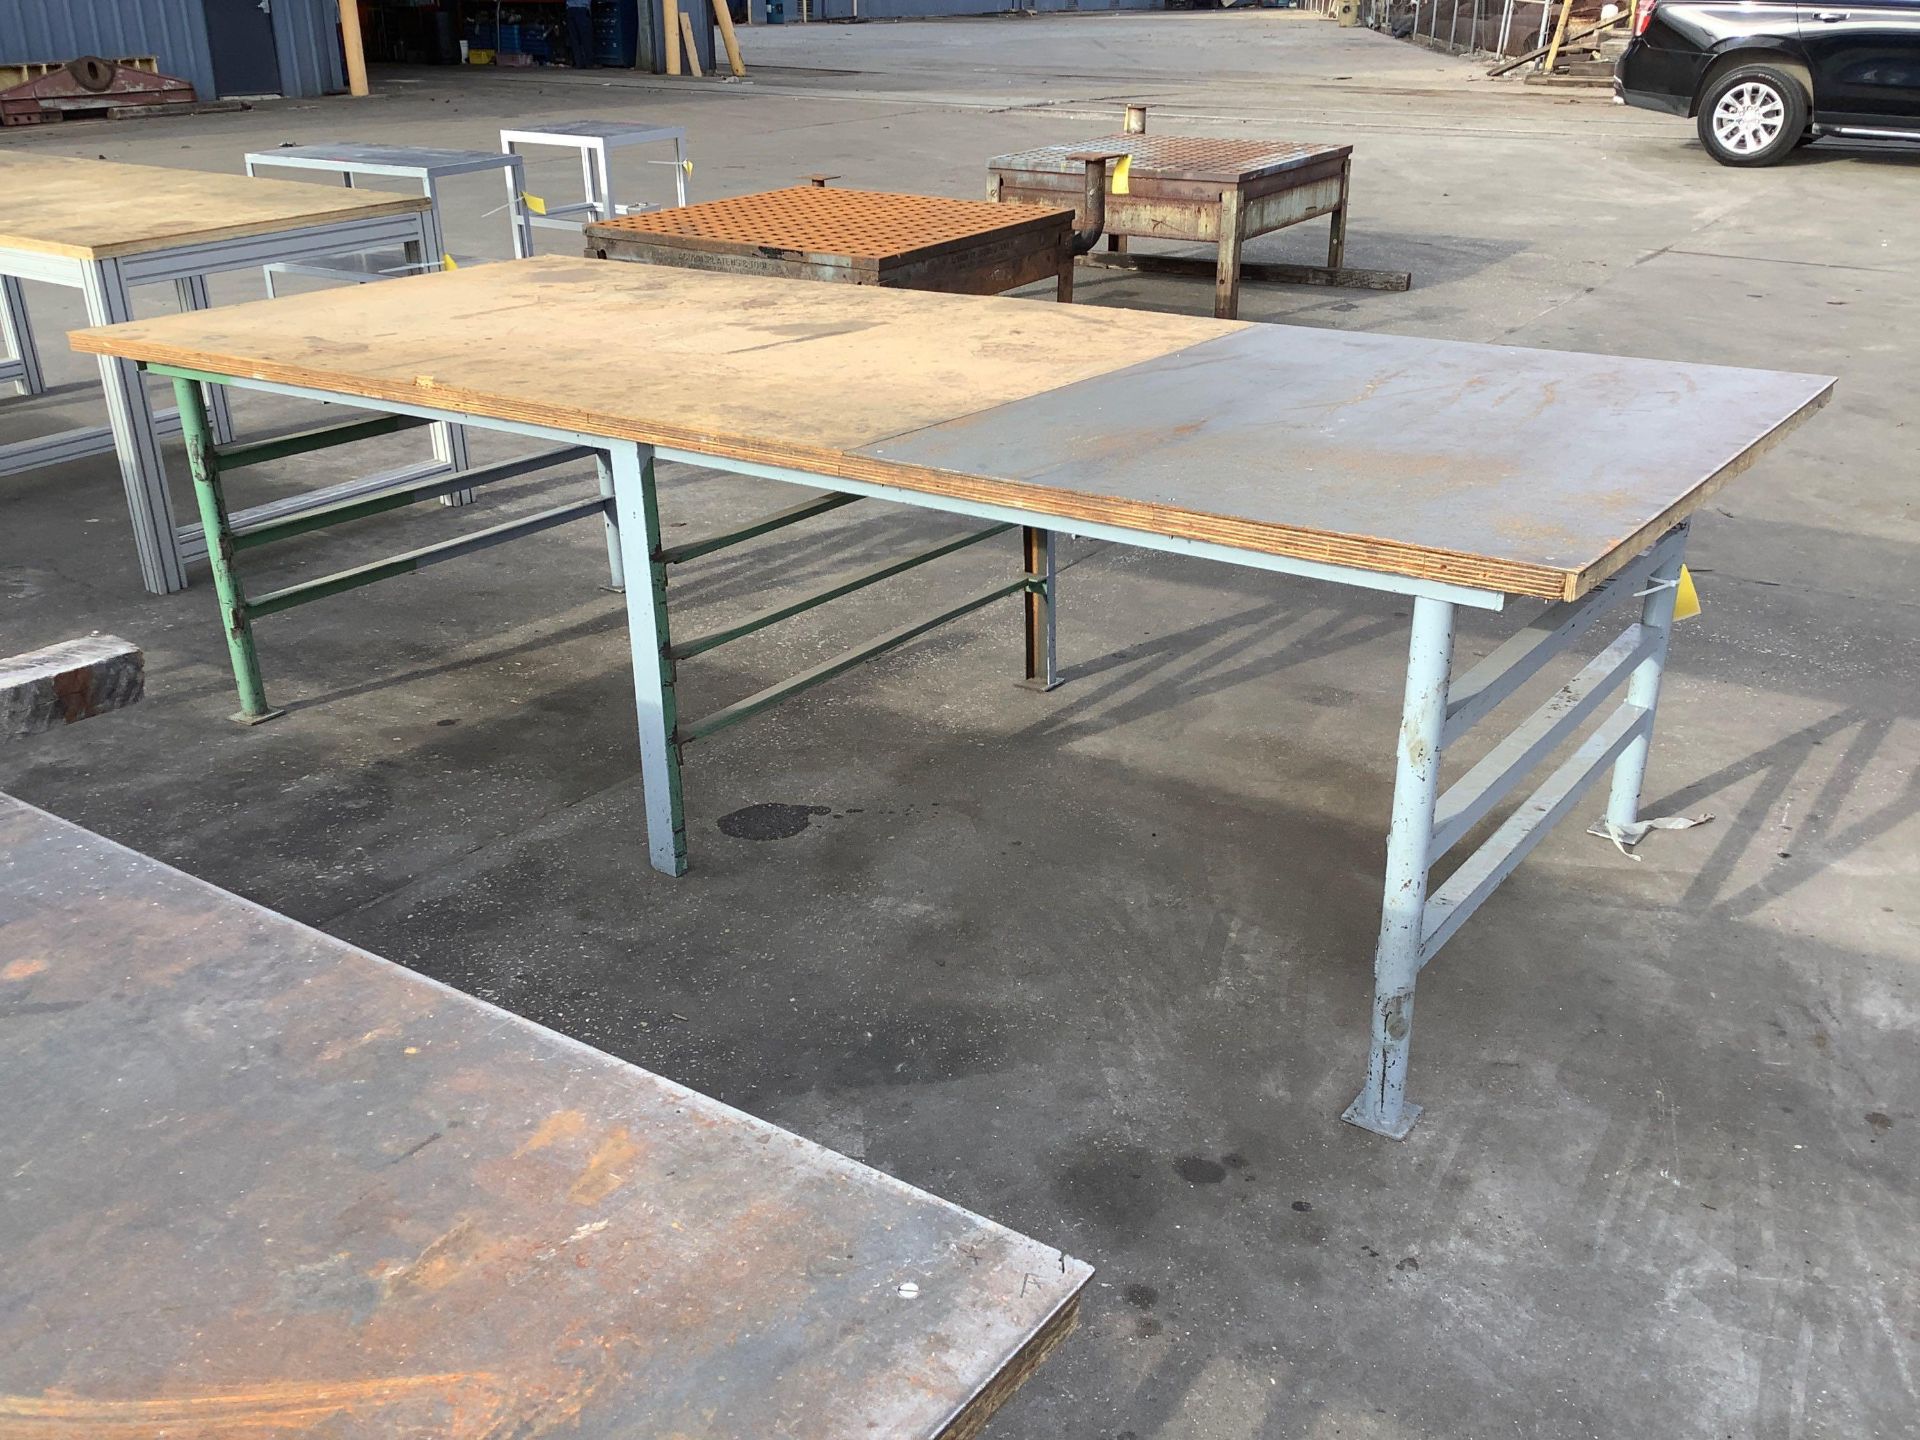 5' x 12' Steel Frame Table - Image 2 of 3